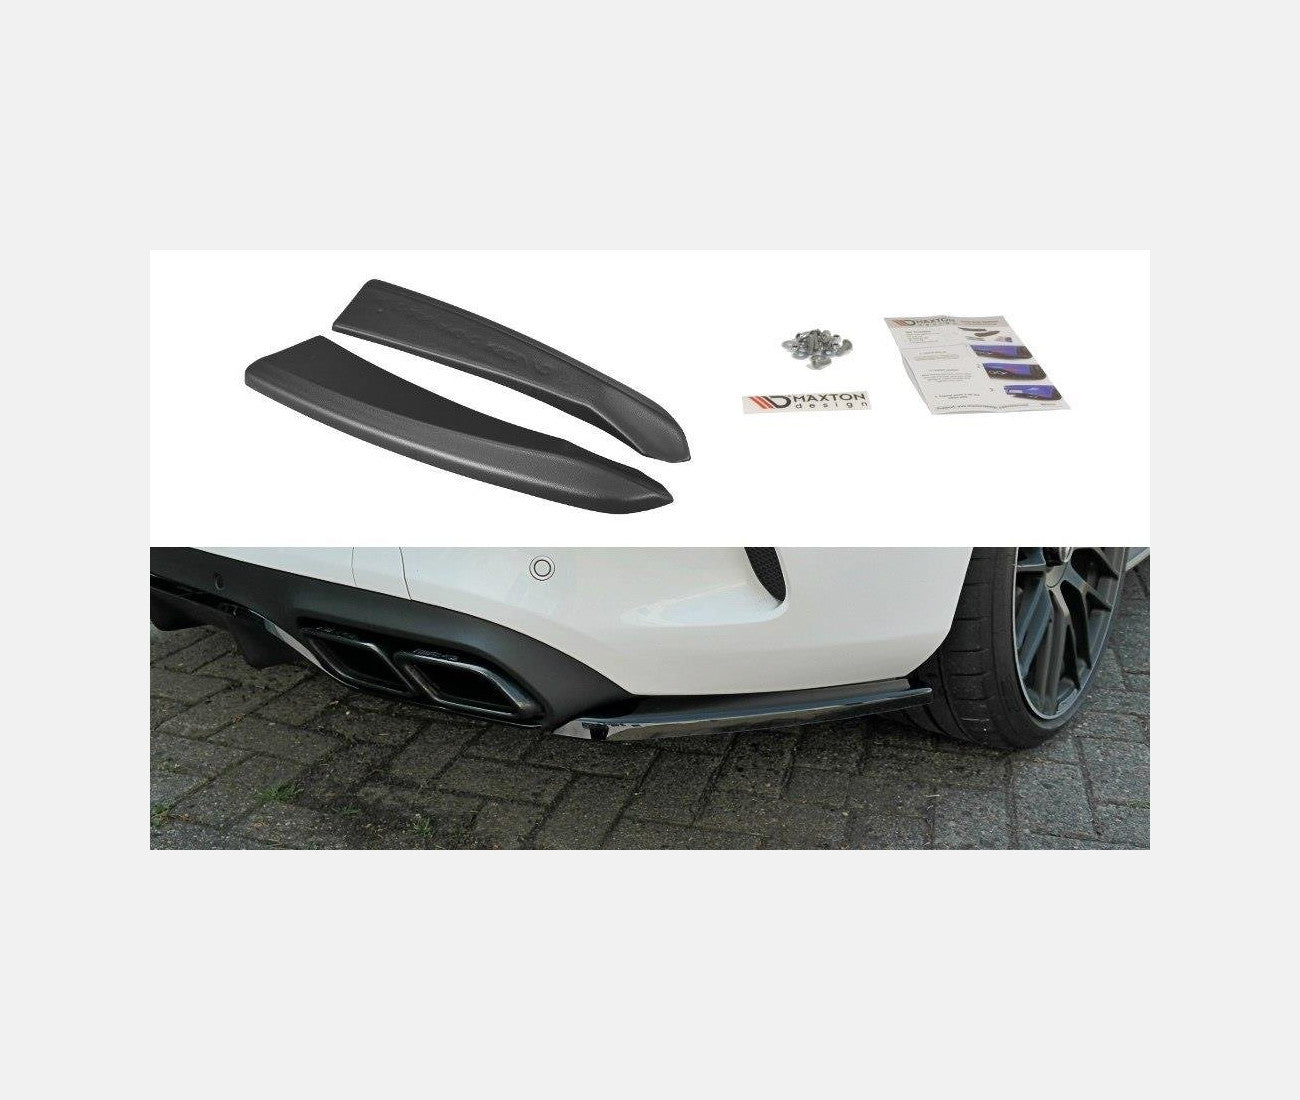 MAXTON DESIGN flaps diffuser for Mercedes C205 C63 AMG Coupe 